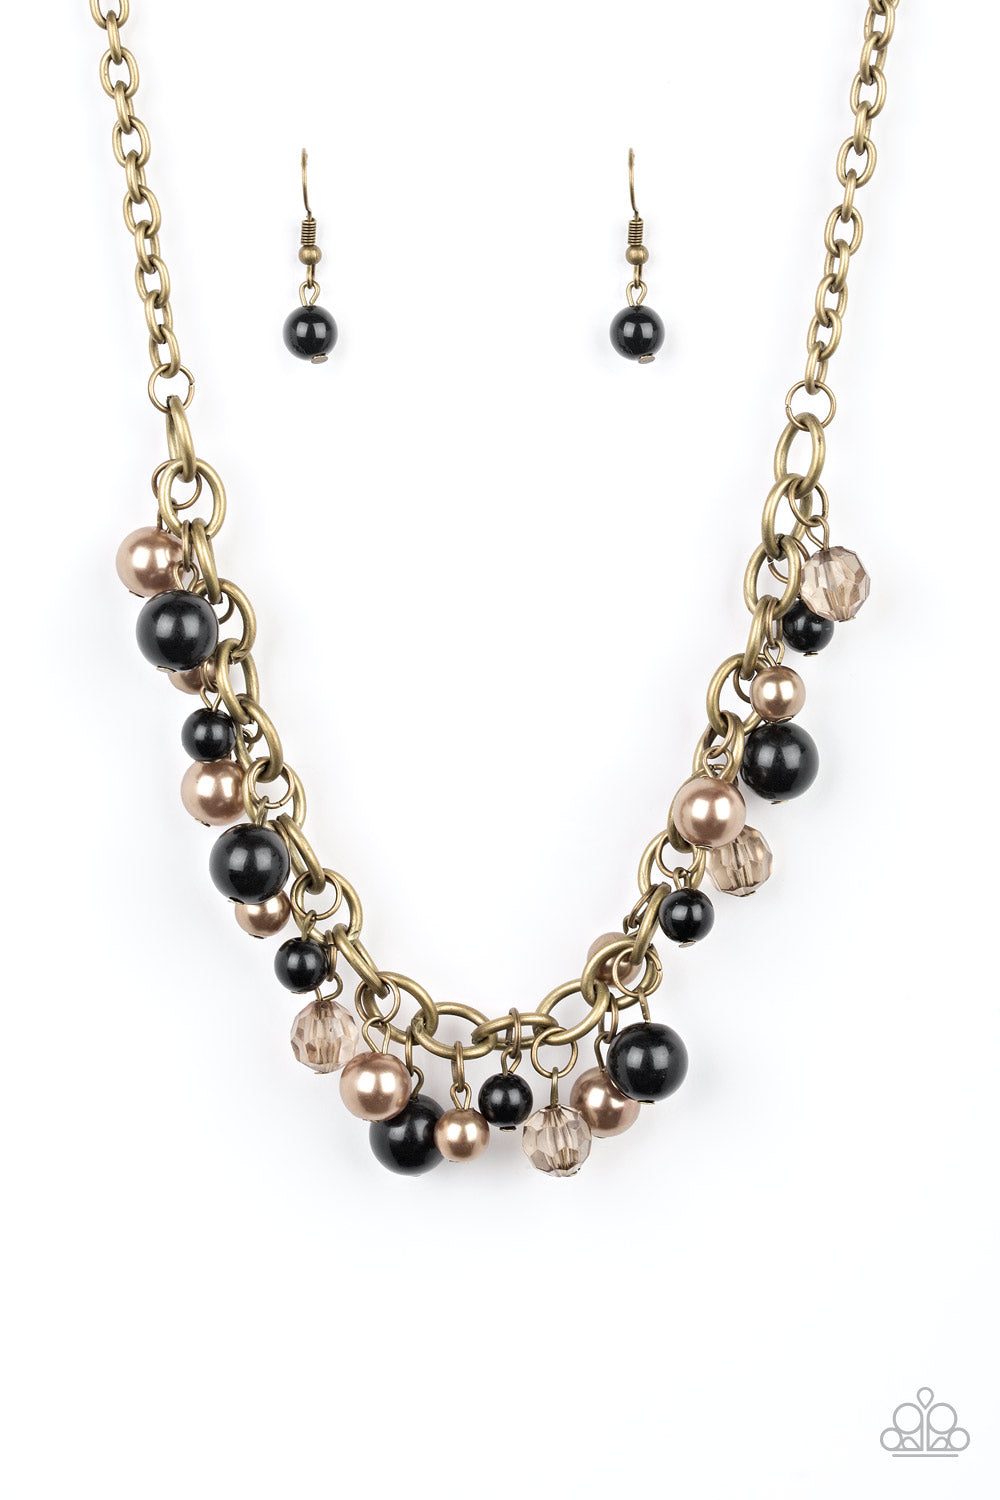 Pearly brass, polished black, and glittery crystal-like beads swing from a bold brass chain, creating a refined fringe below the collar. Features an adjustable clasp closure.